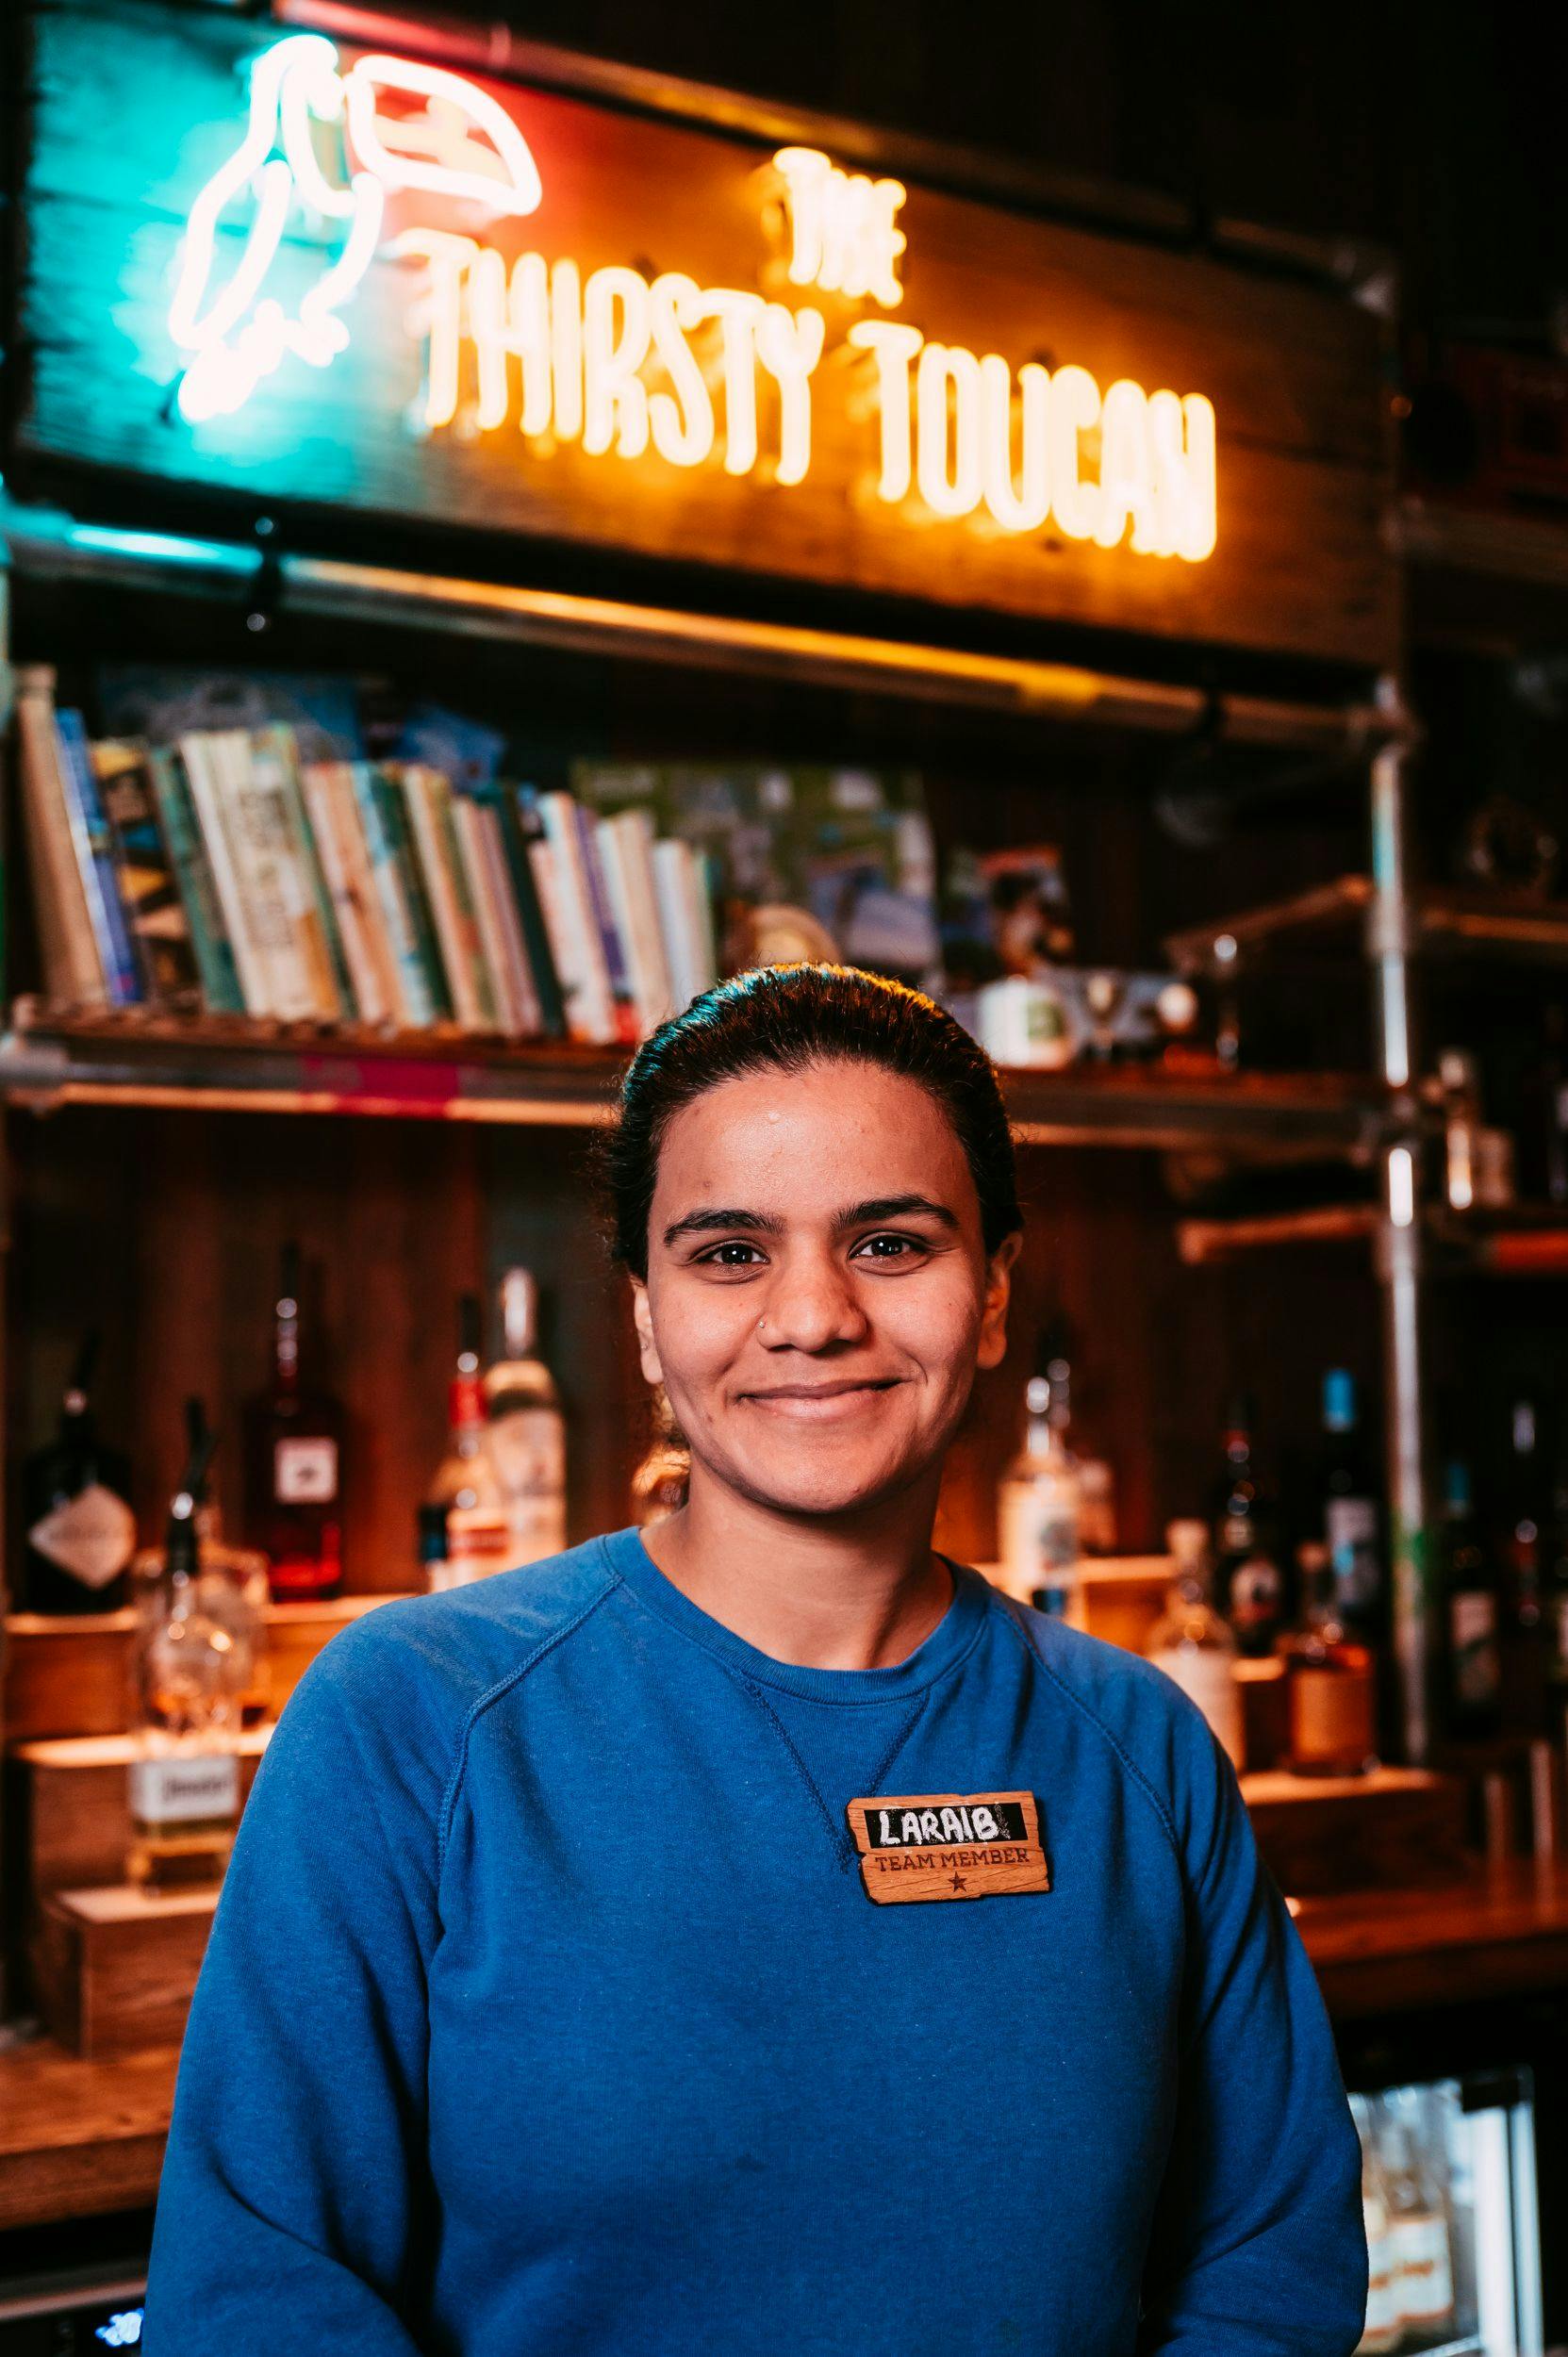 Treetop employee in a blue shirt smiles at the camera from within the Thirsty Toucan Bar.